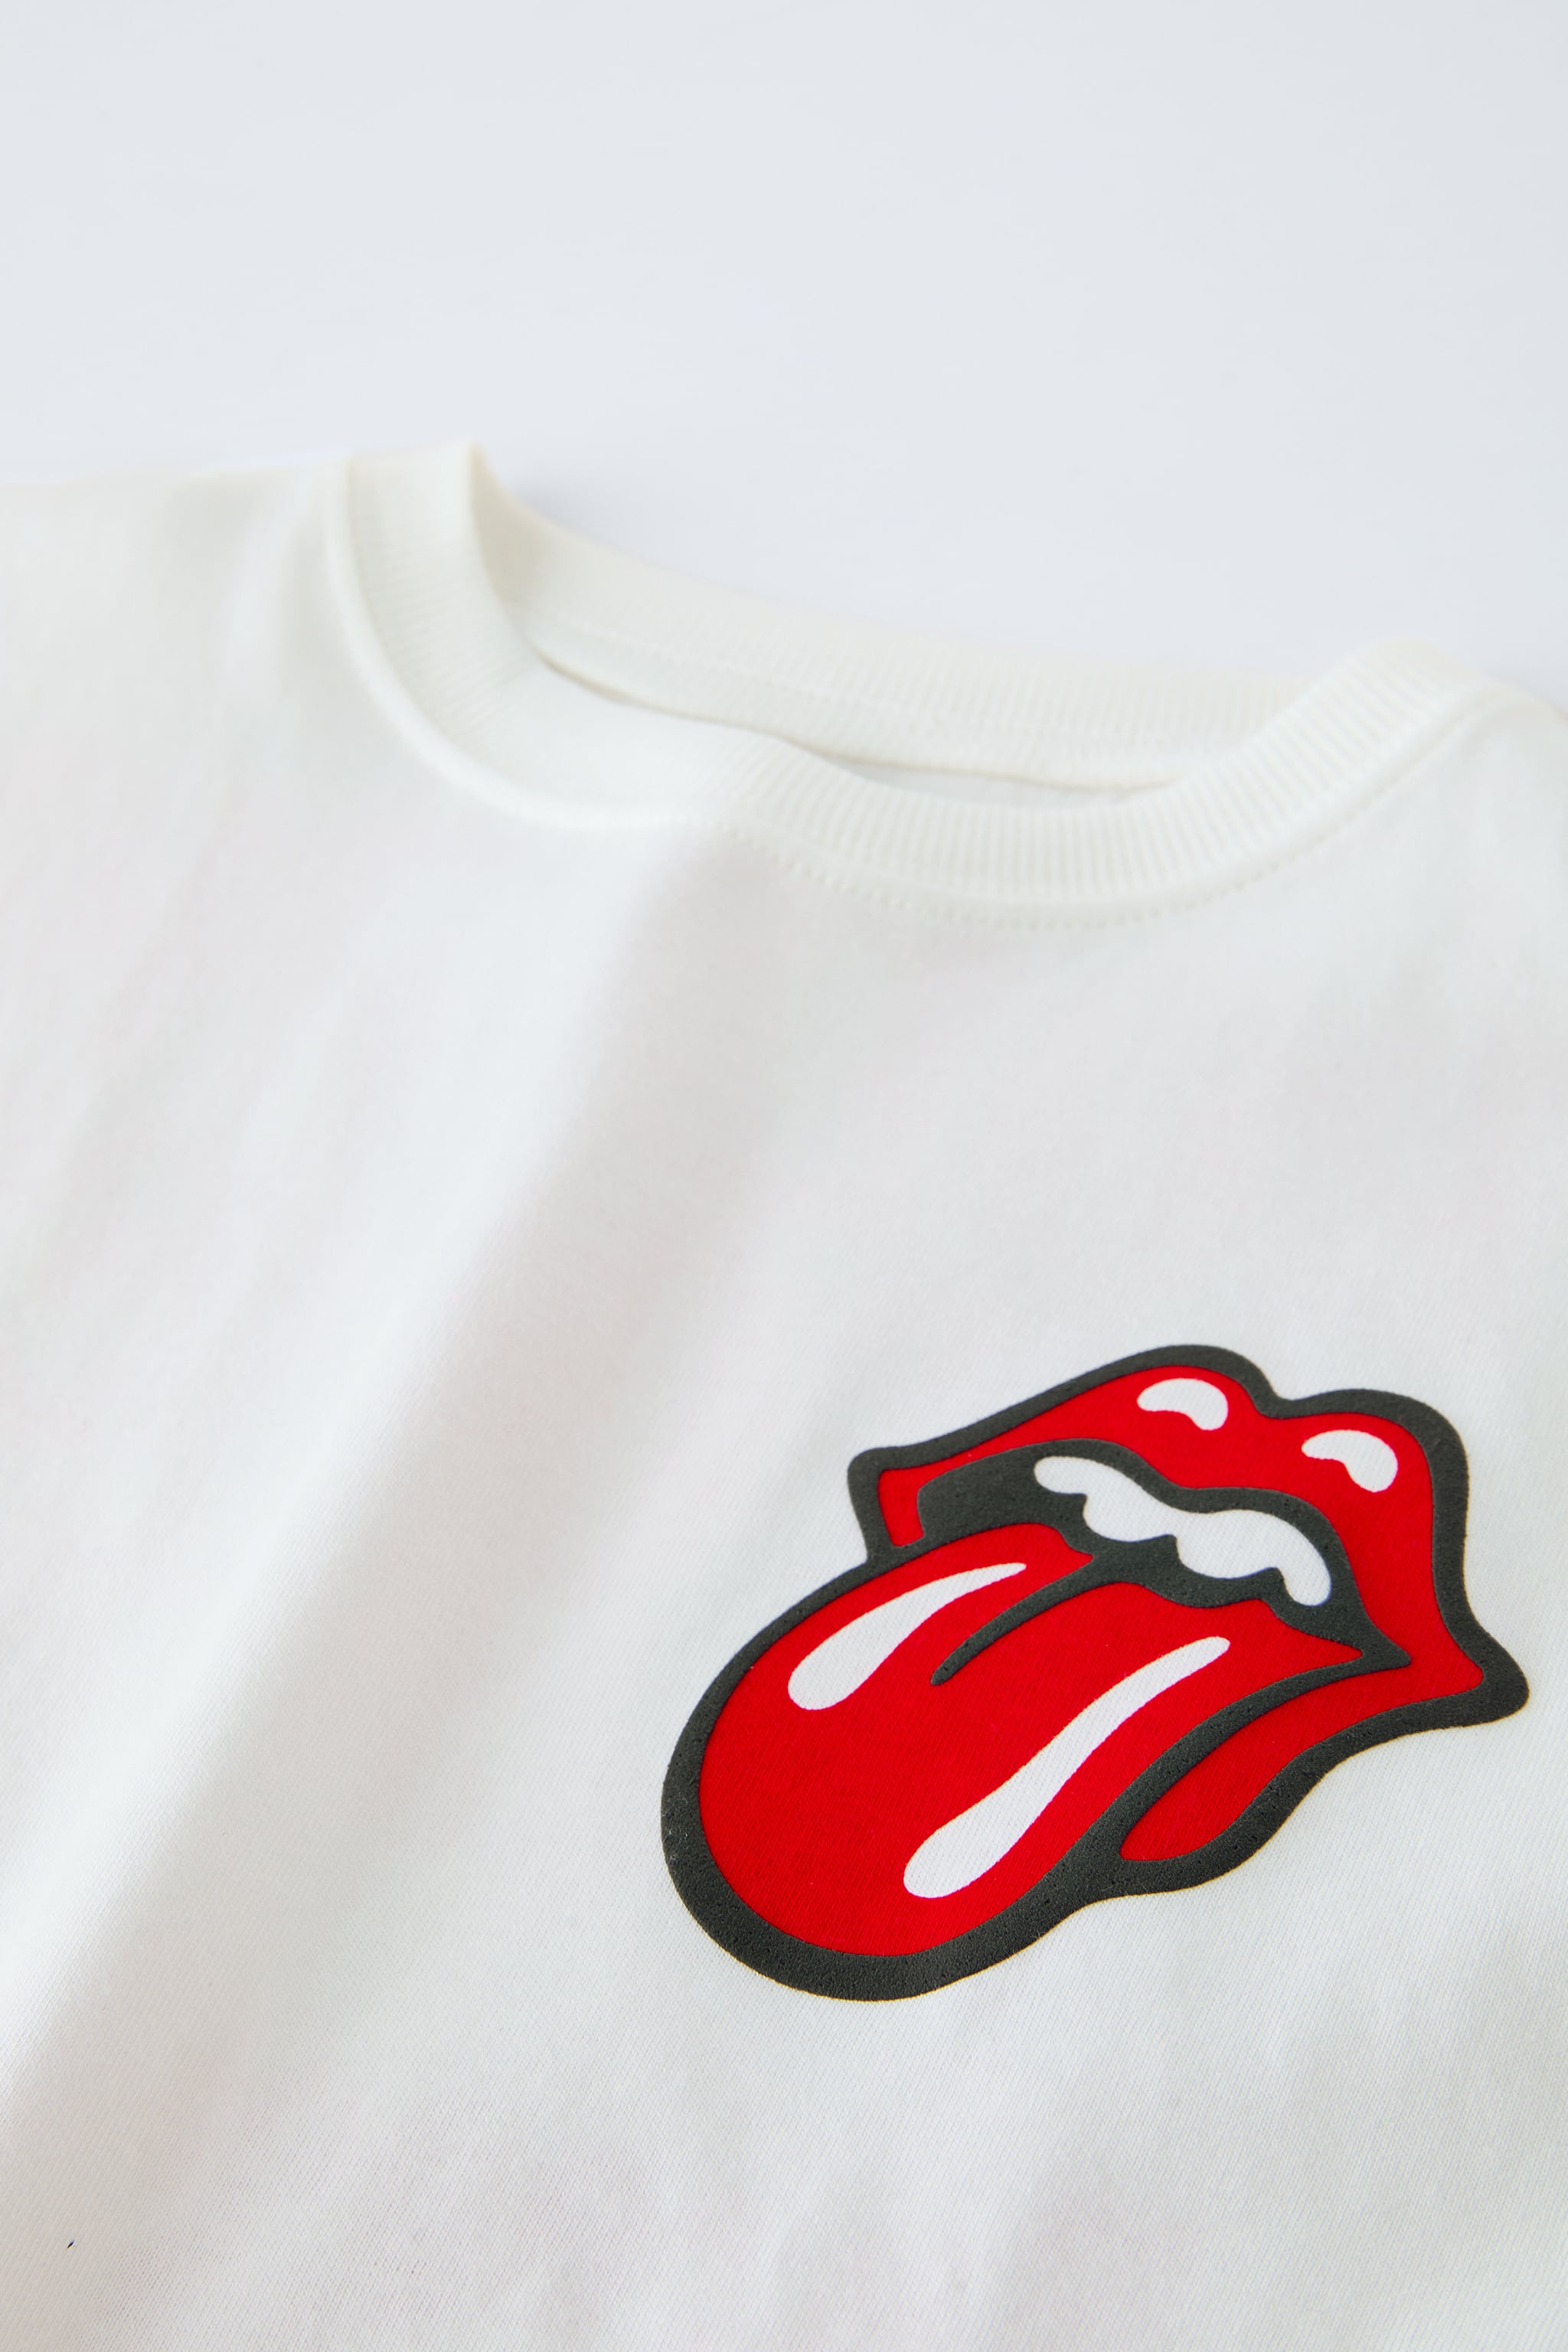 THE ROLLING STONES ® T-SHIRT